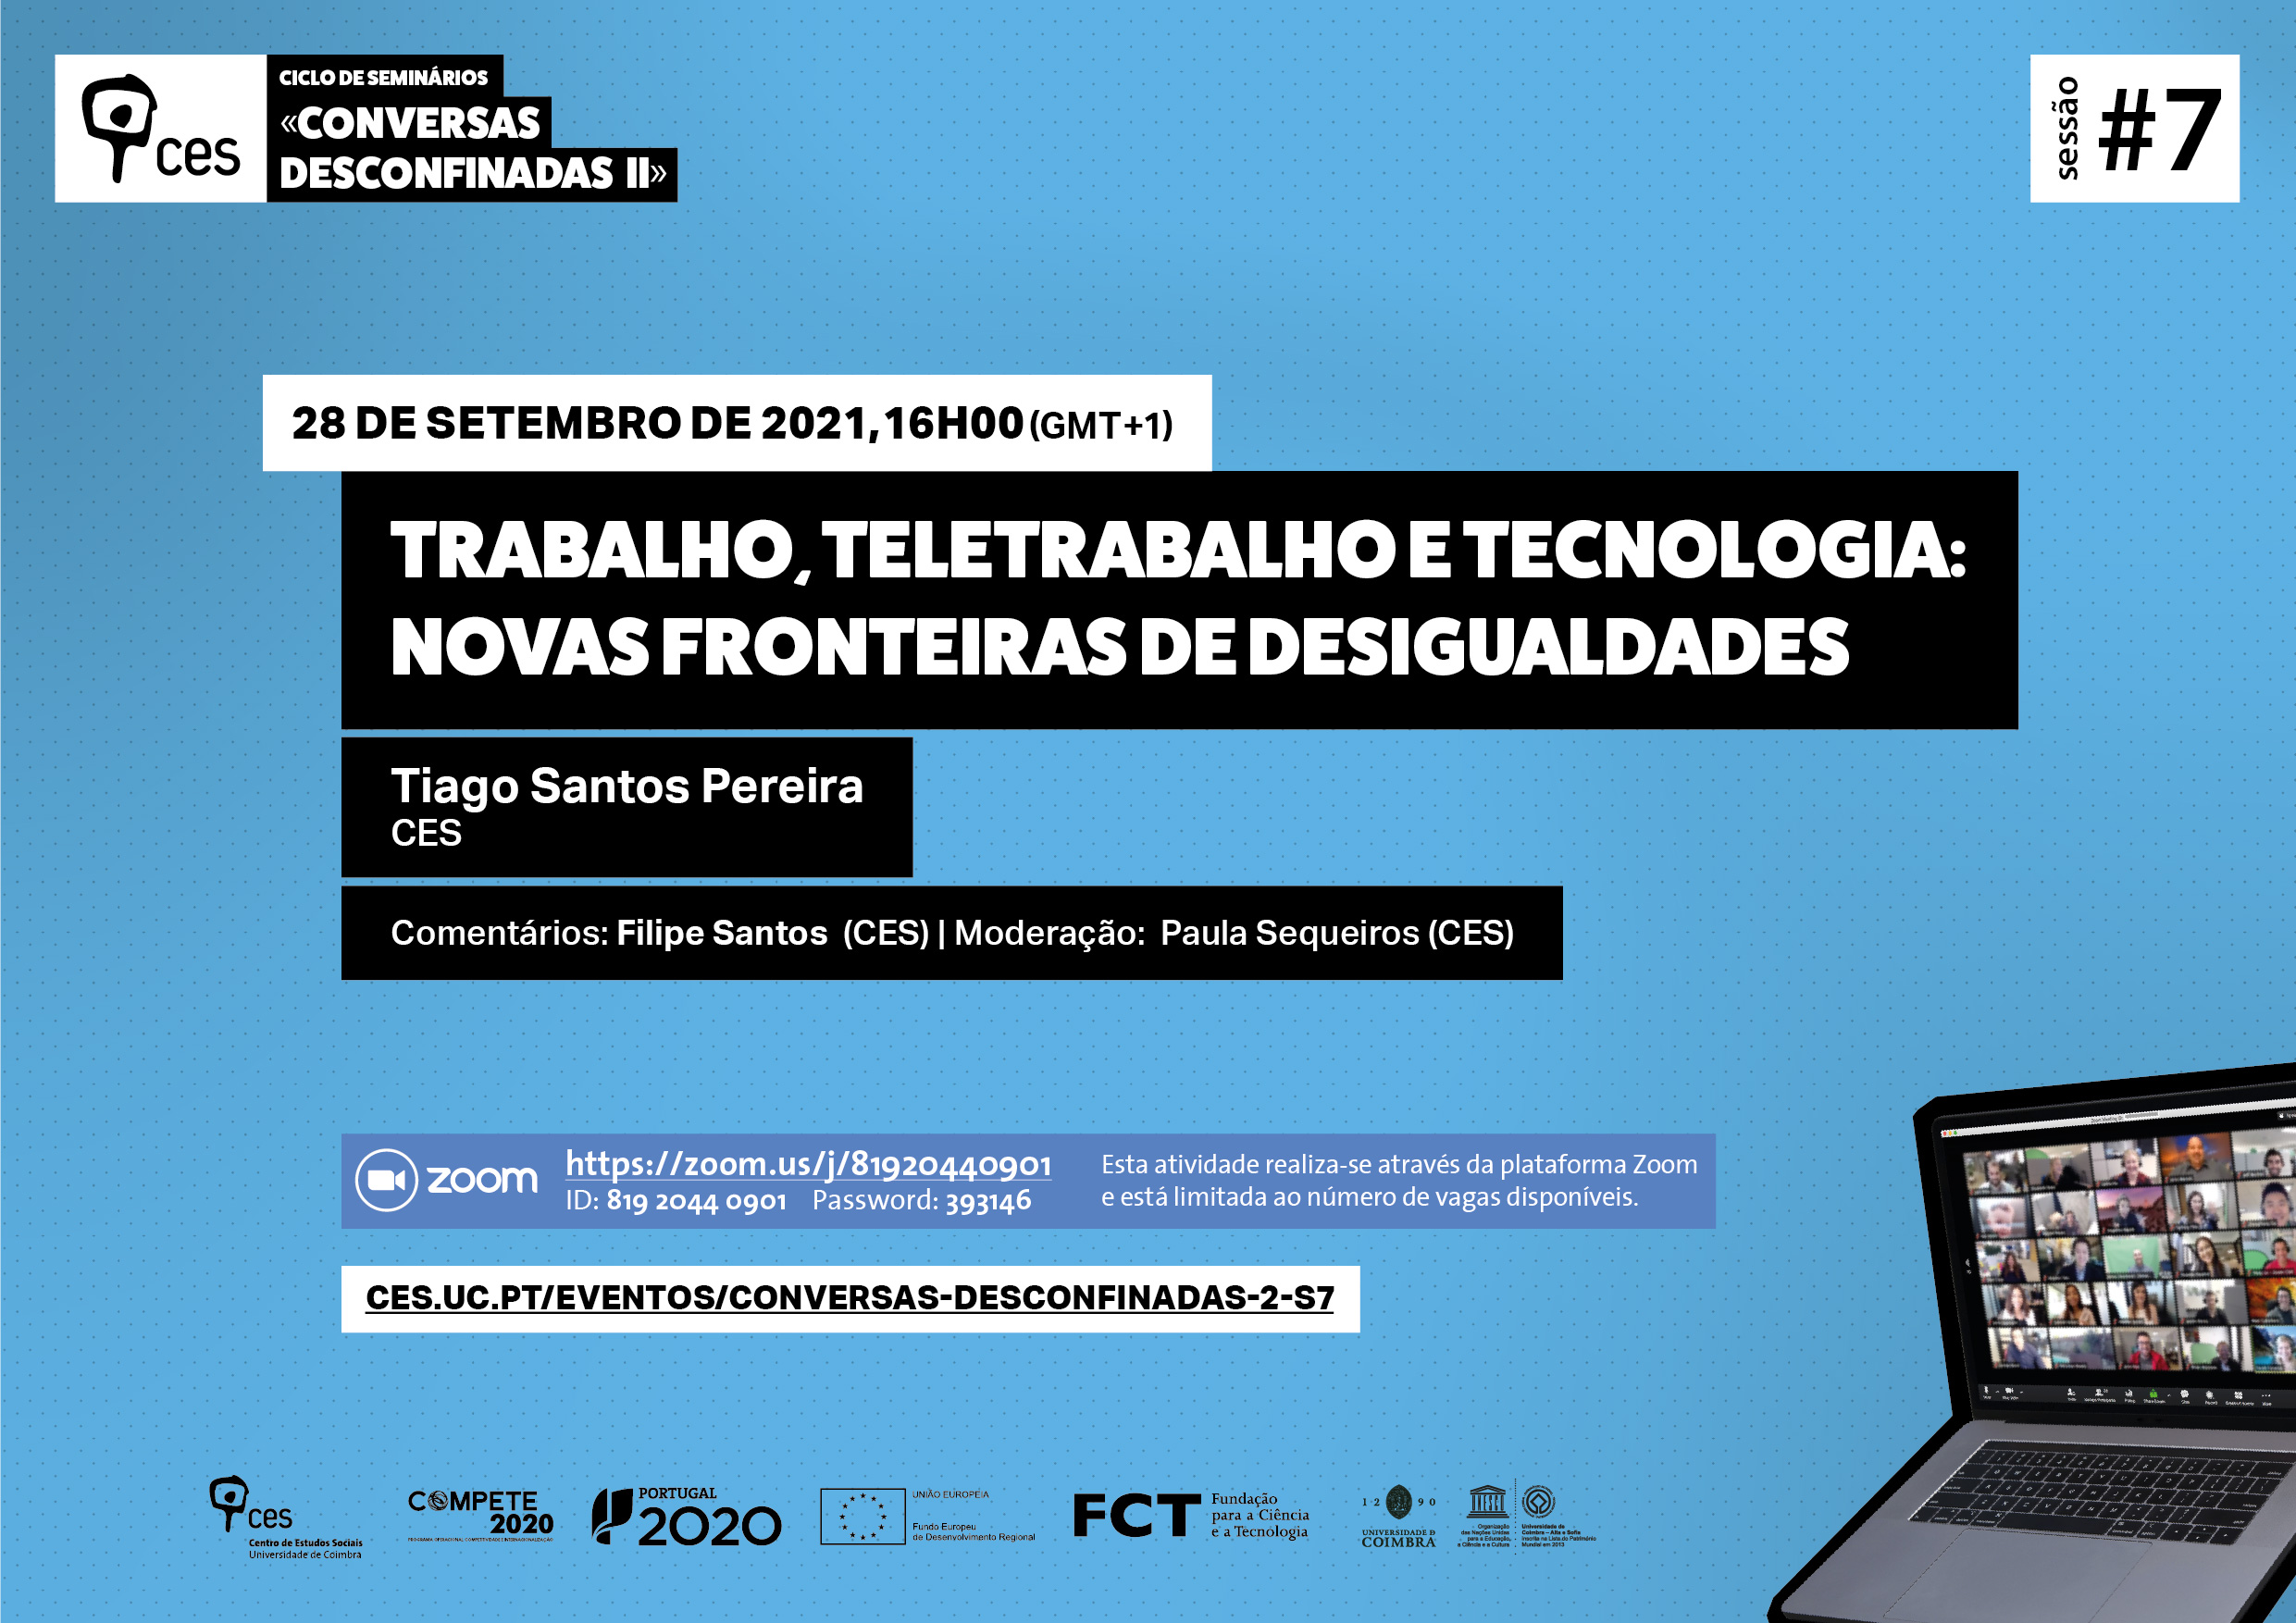 Work, Telework and Technology: New frontiers of inequalities<span id="edit_32686"><script>$(function() { $('#edit_32686').load( "/myces/user/editobj.php?tipo=evento&id=32686" ); });</script></span>